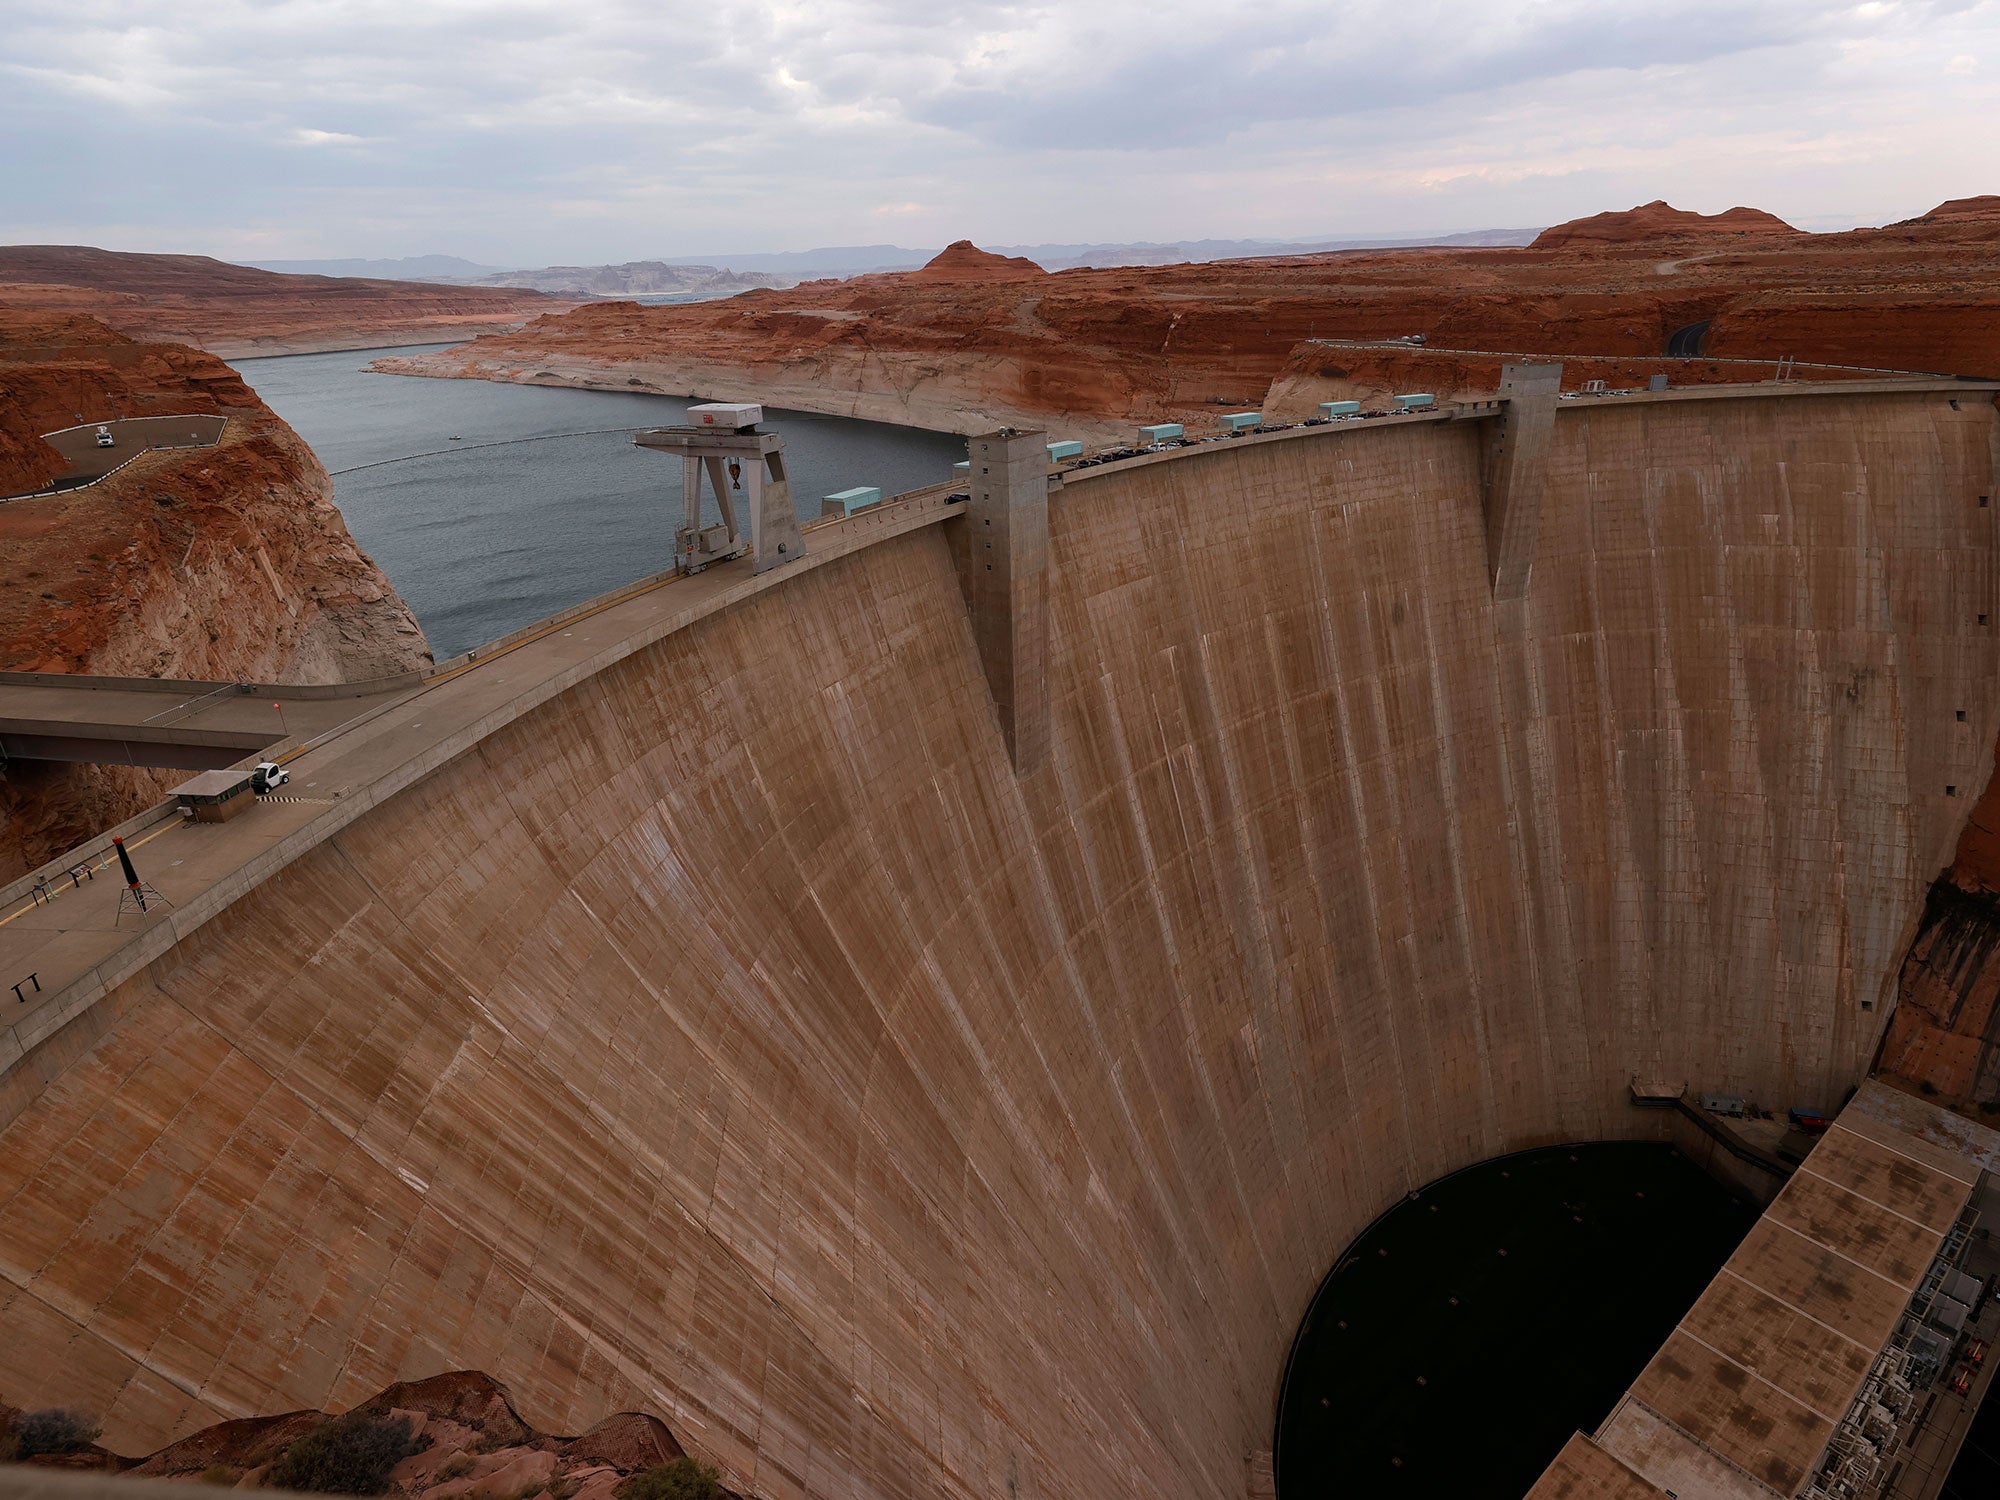 Droughts threaten one of the Southwest power grid’s biggest electricity generators